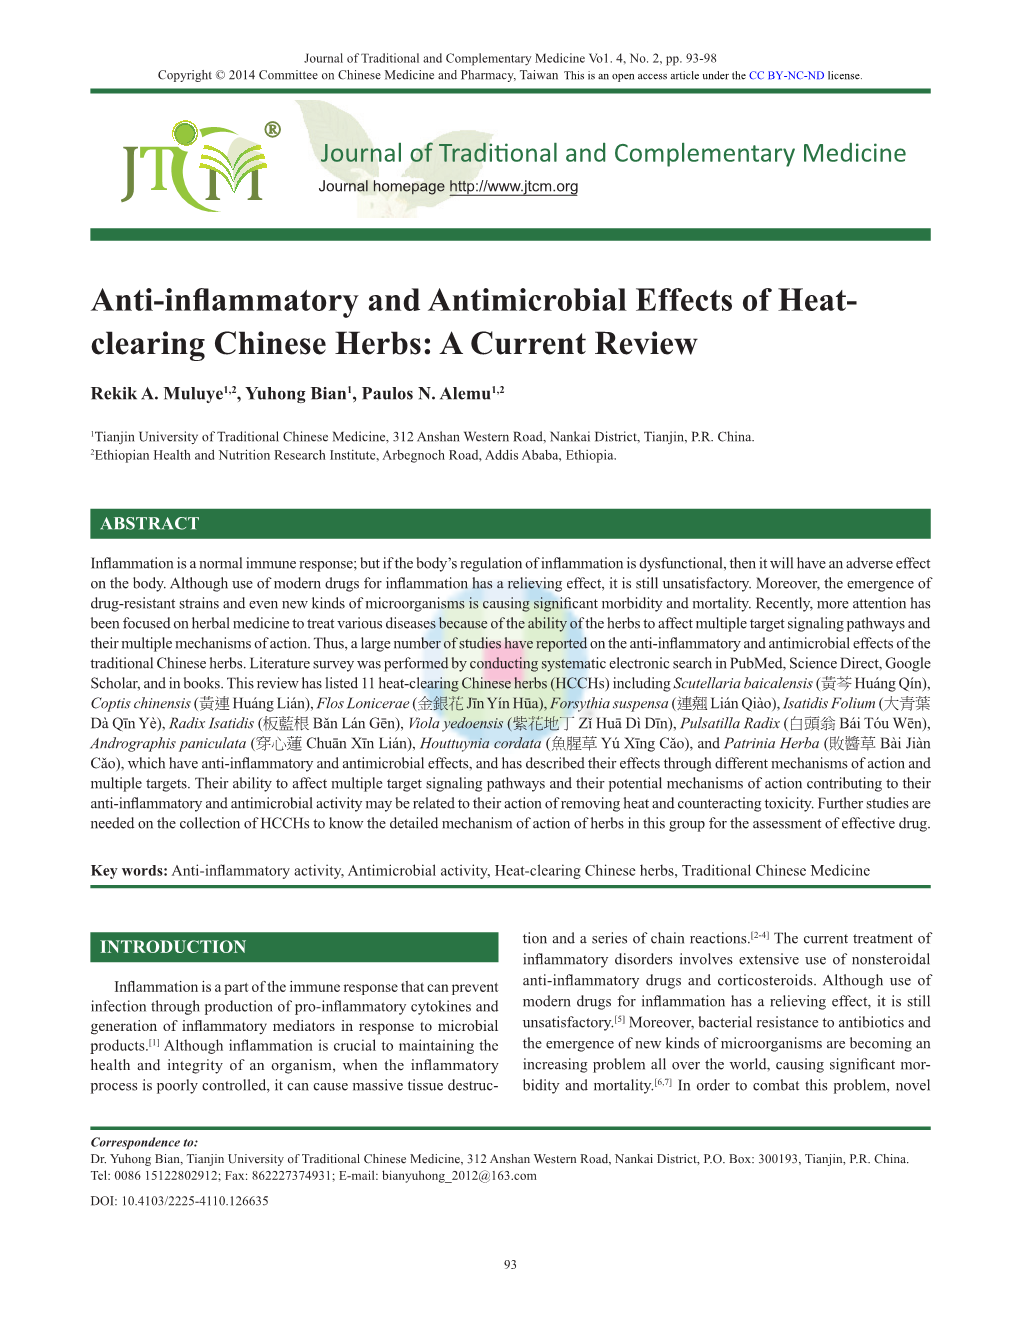 Anti-Inflammatory and Antimicrobial Effects of Heat-Clearing Chinese Herbs